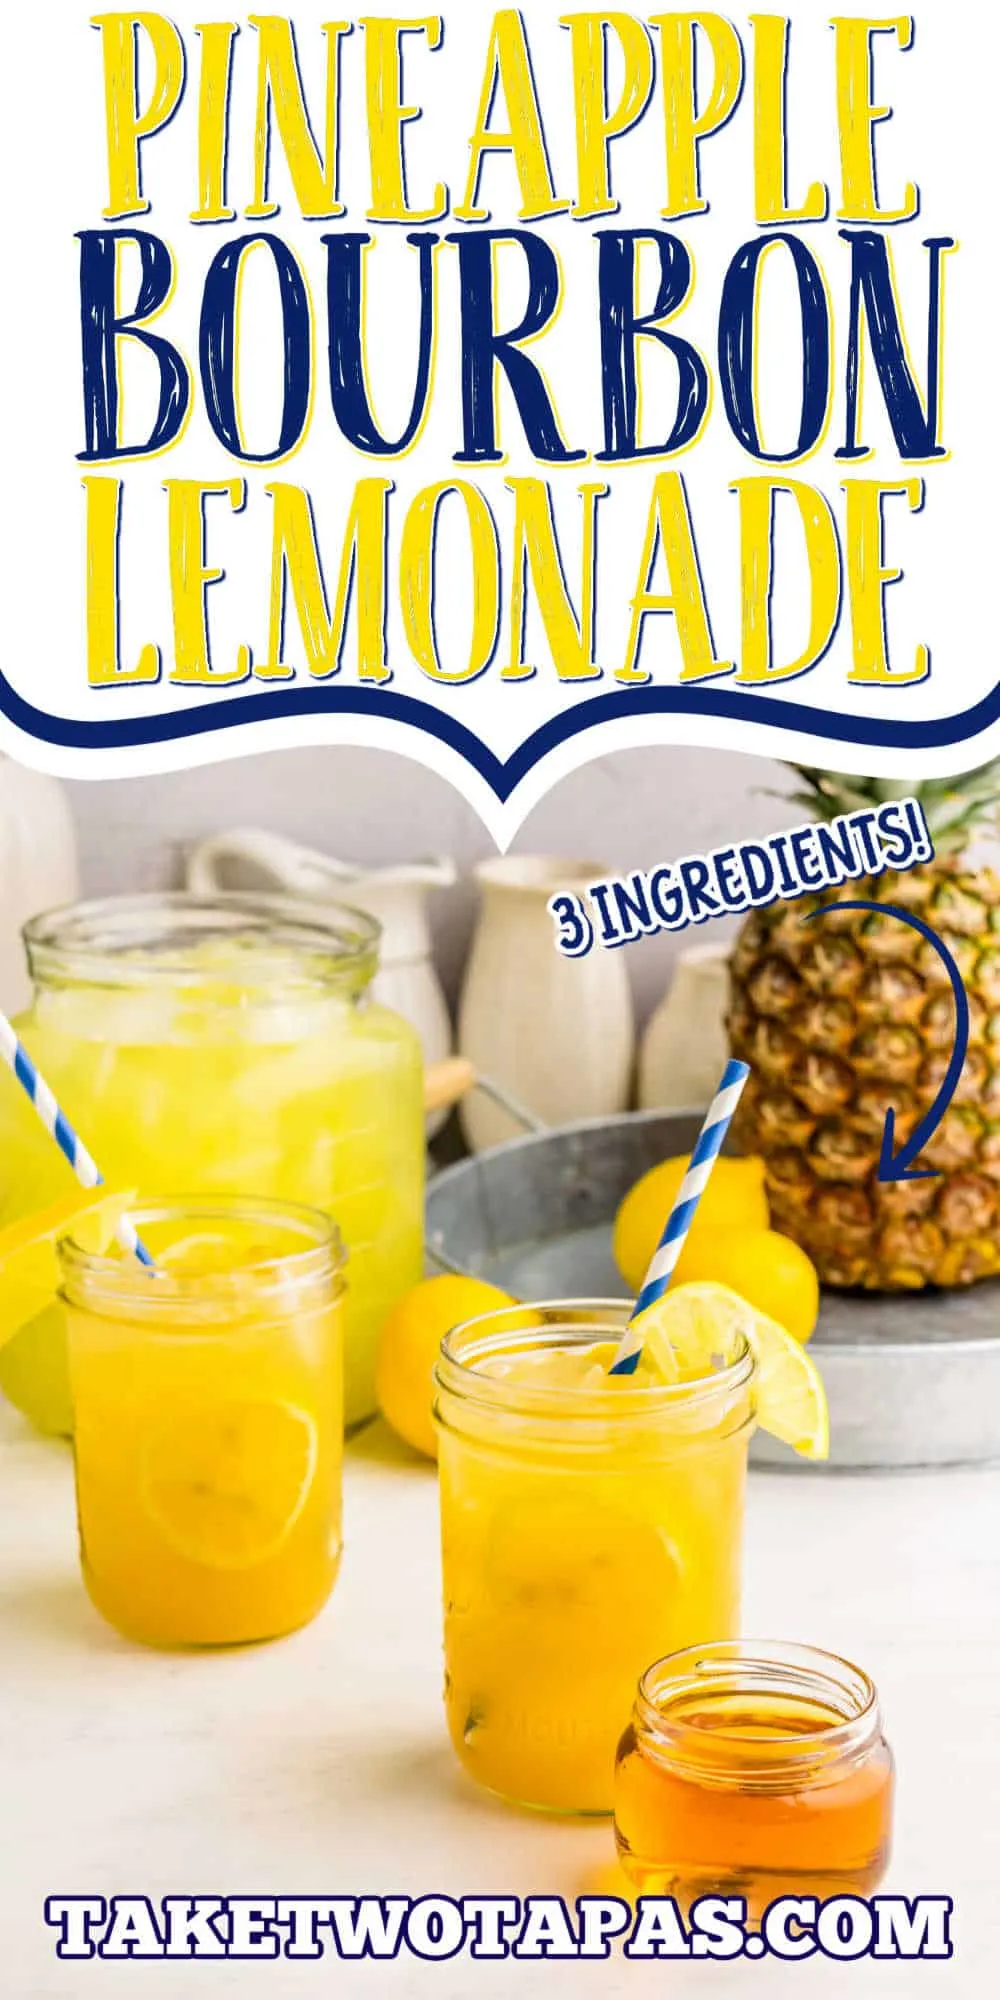 pinterest image for cocktail with text "pineapple bourbon lemonade"